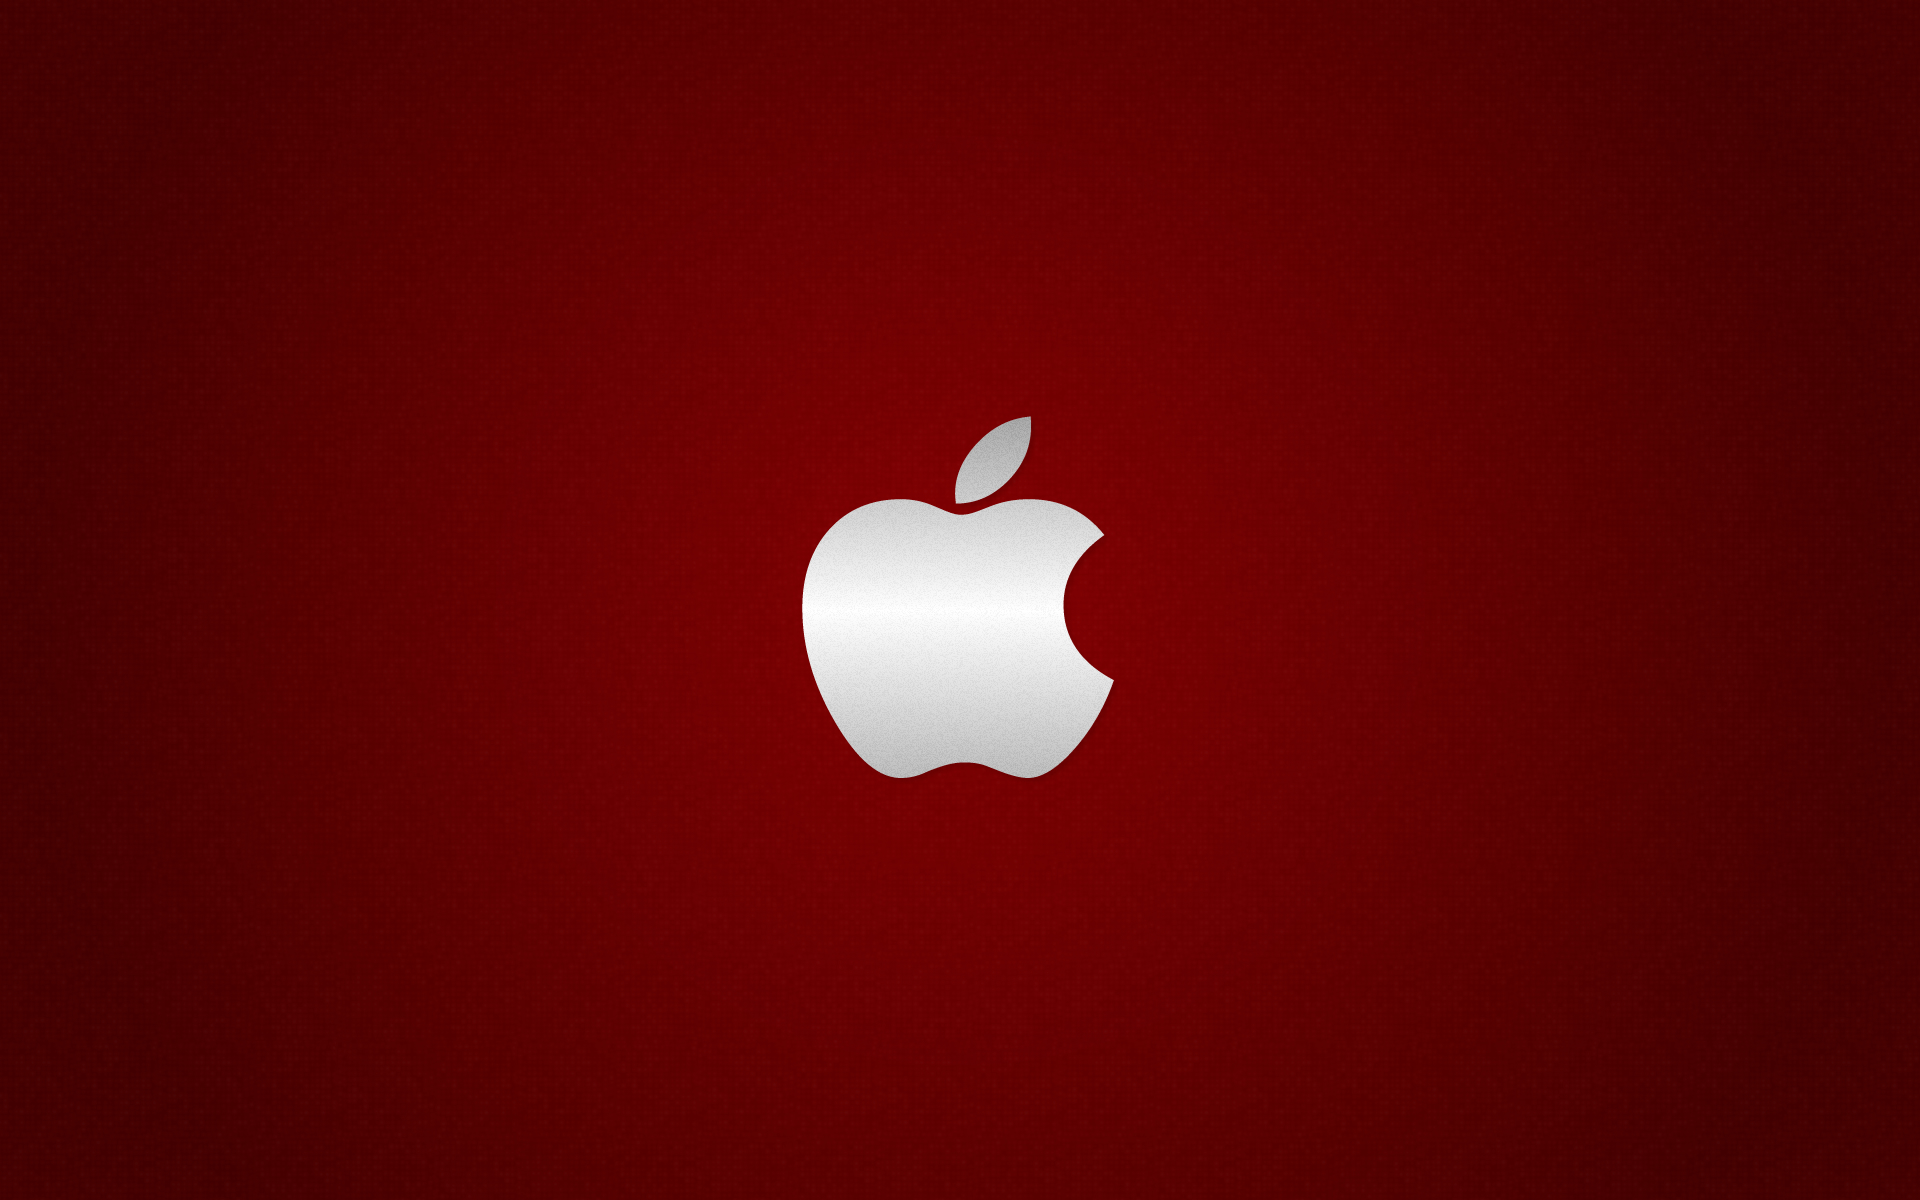 Glass Red Apple Wallpaper for Windows PC and Apple Mac